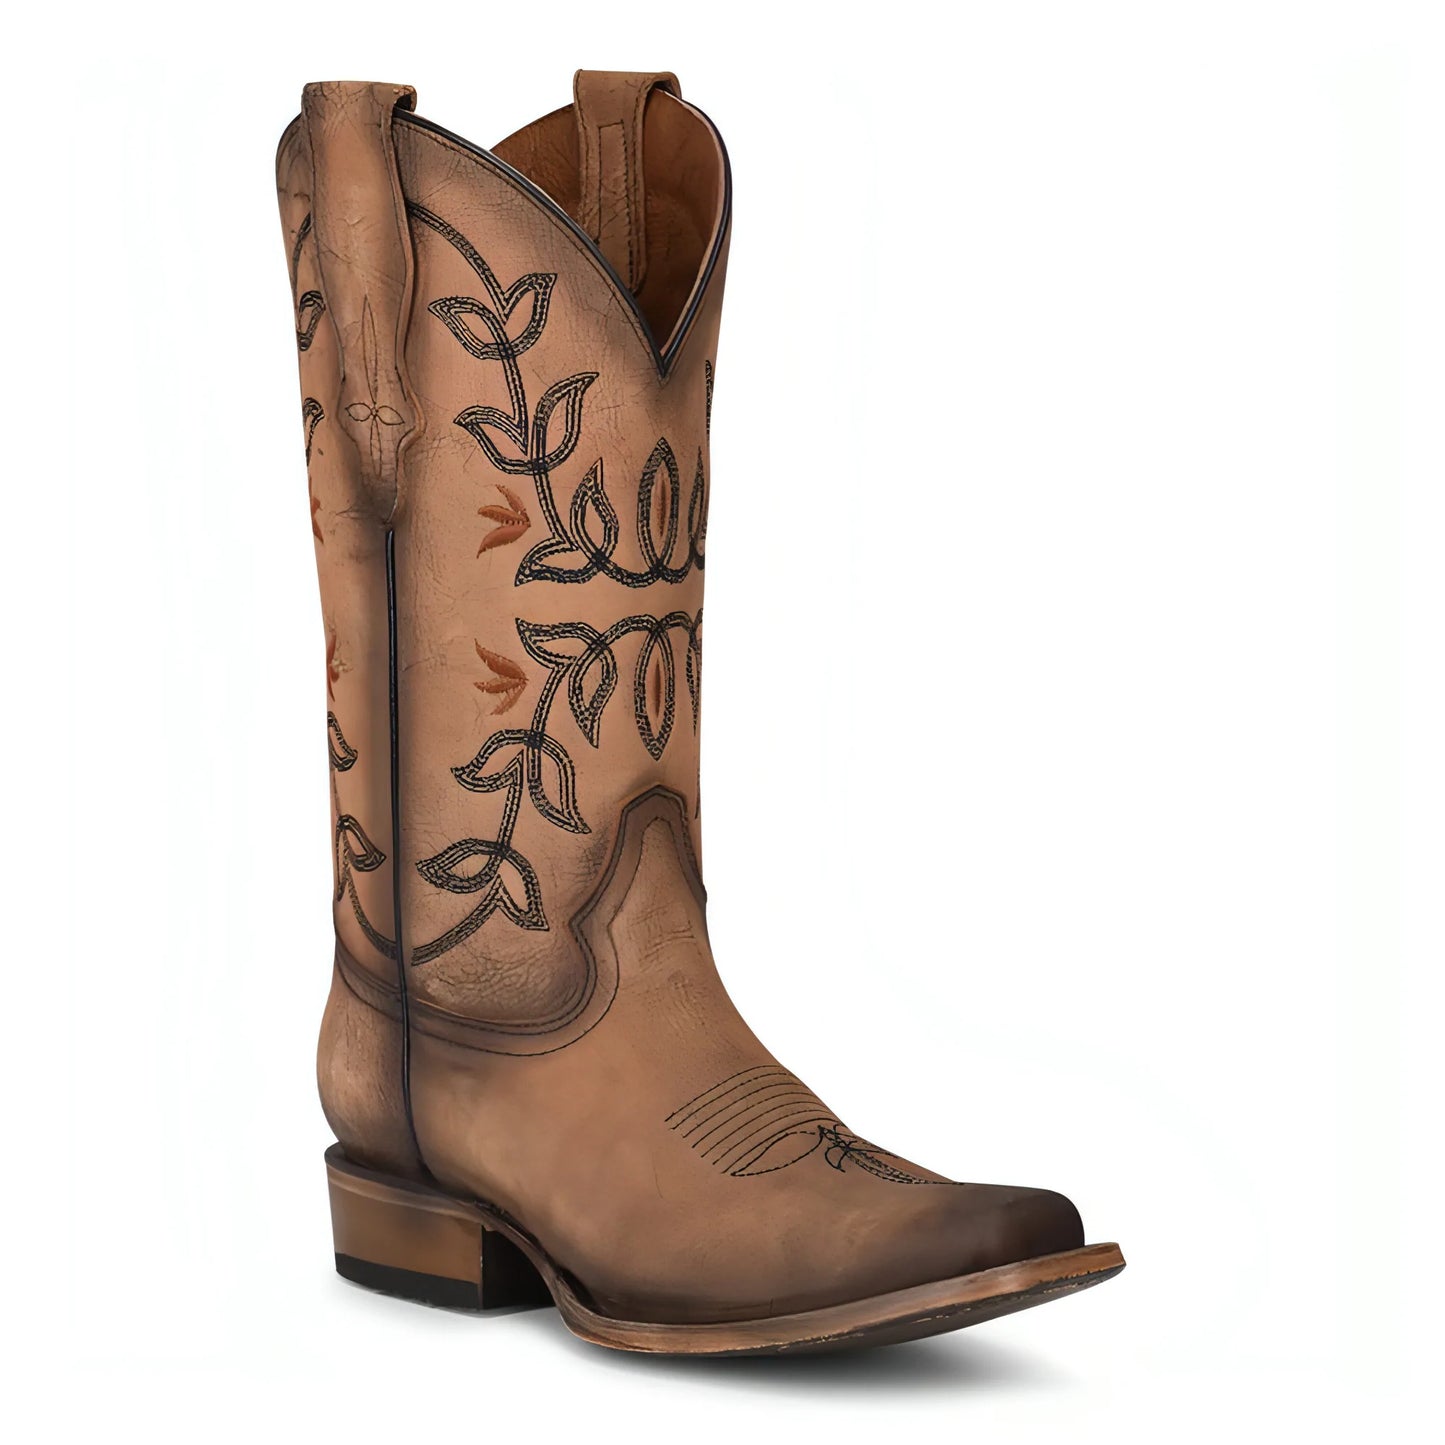 The Kelsi Corral Boots